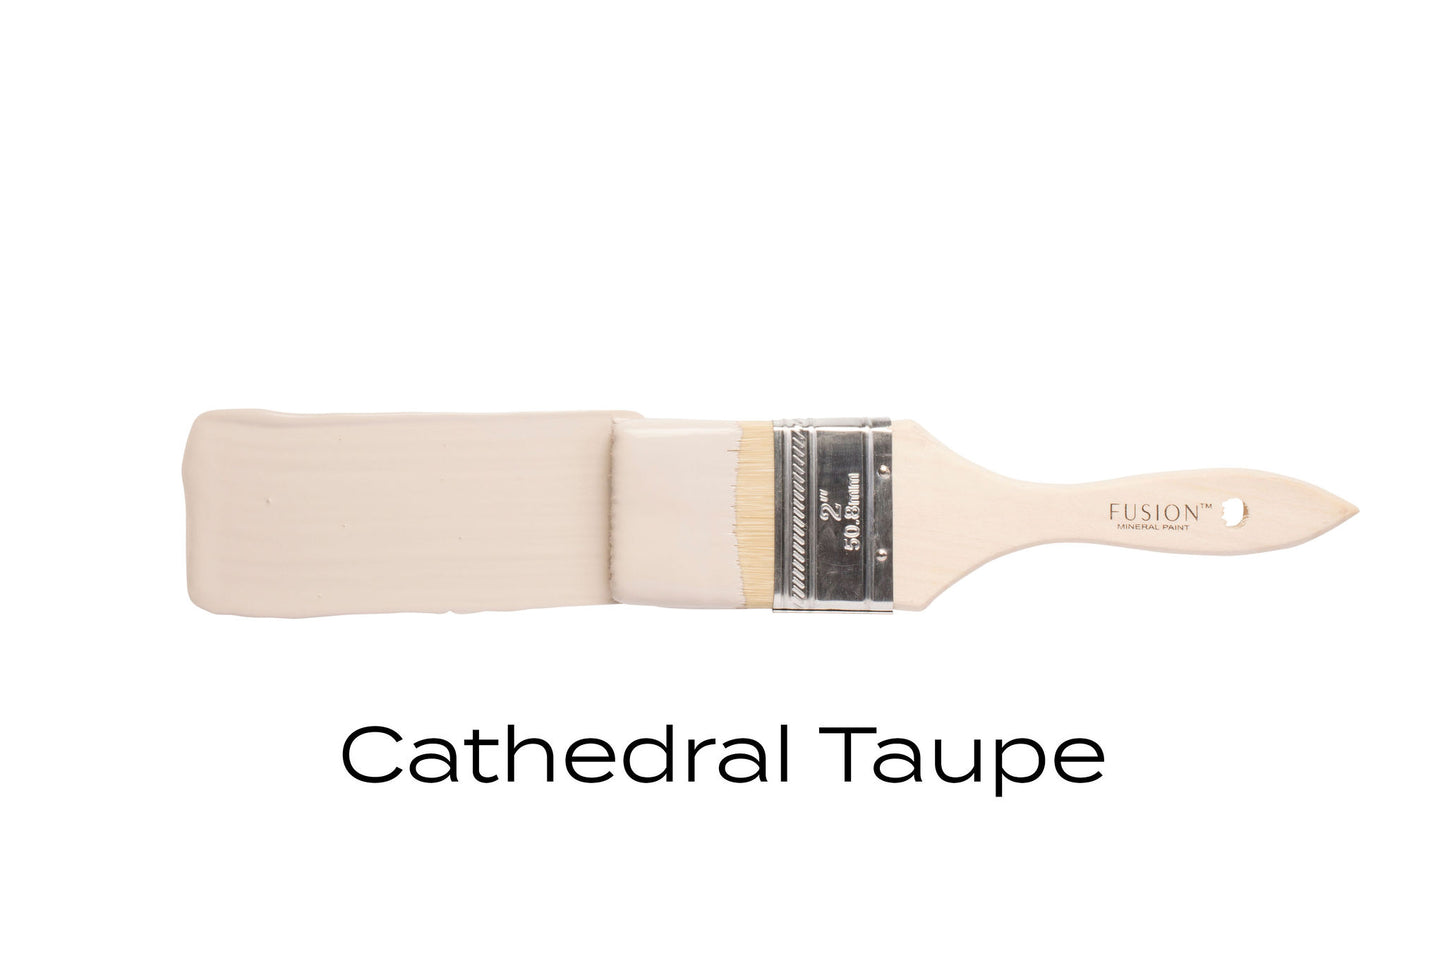 CATHEDRAL TAUPE - Fusion Mineral Paint - 37ml, 500ml